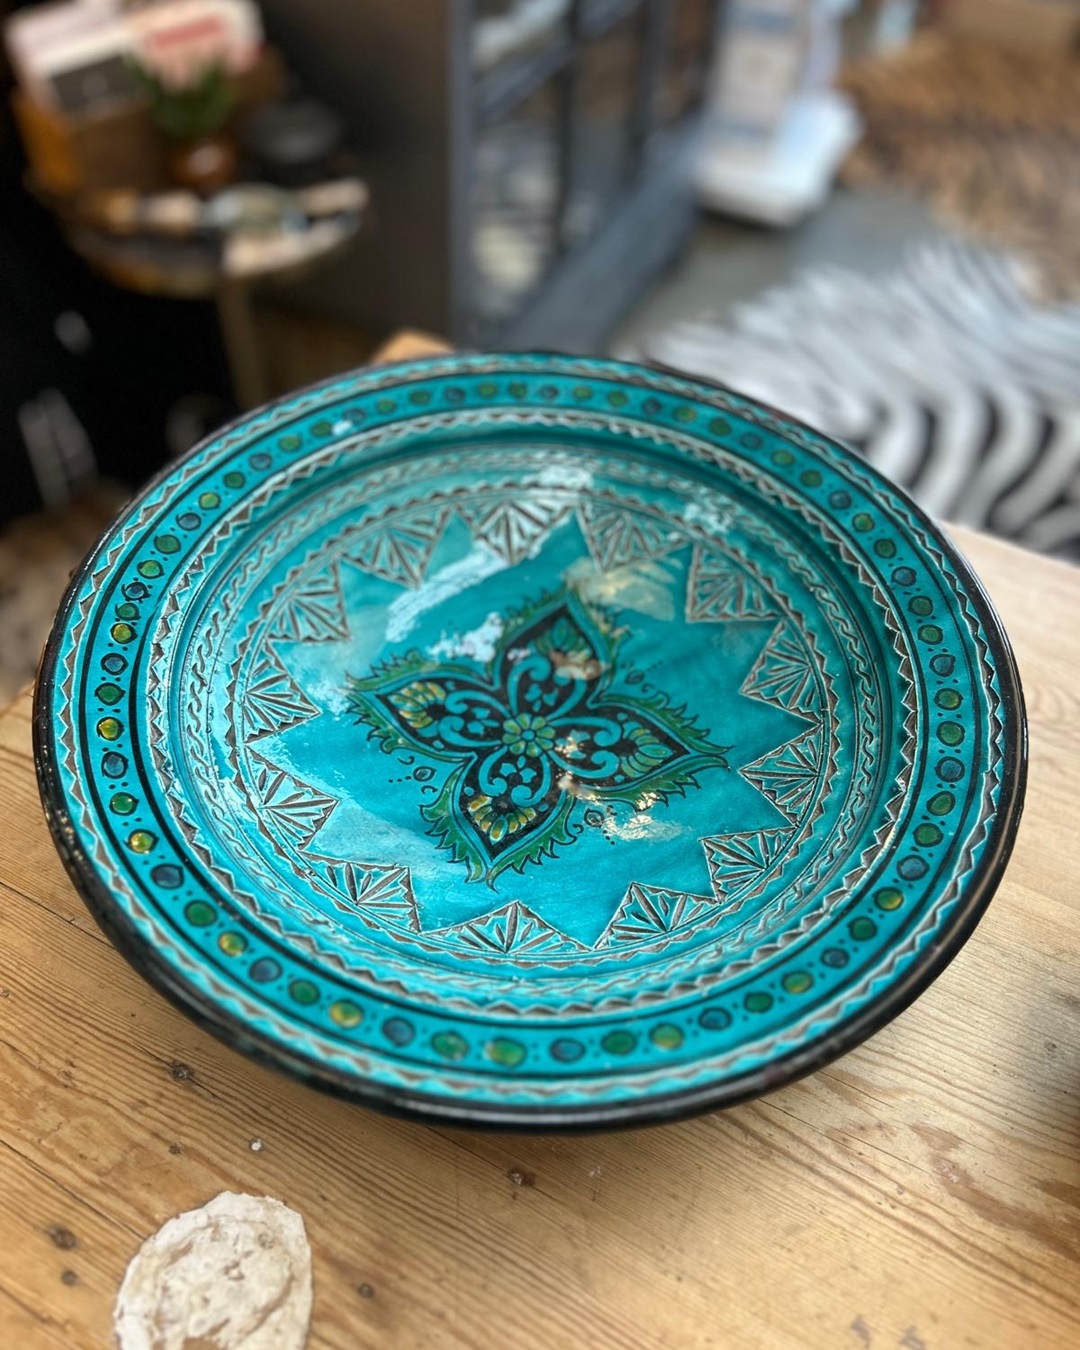 Teal French antique Morrocan dish on wooden table